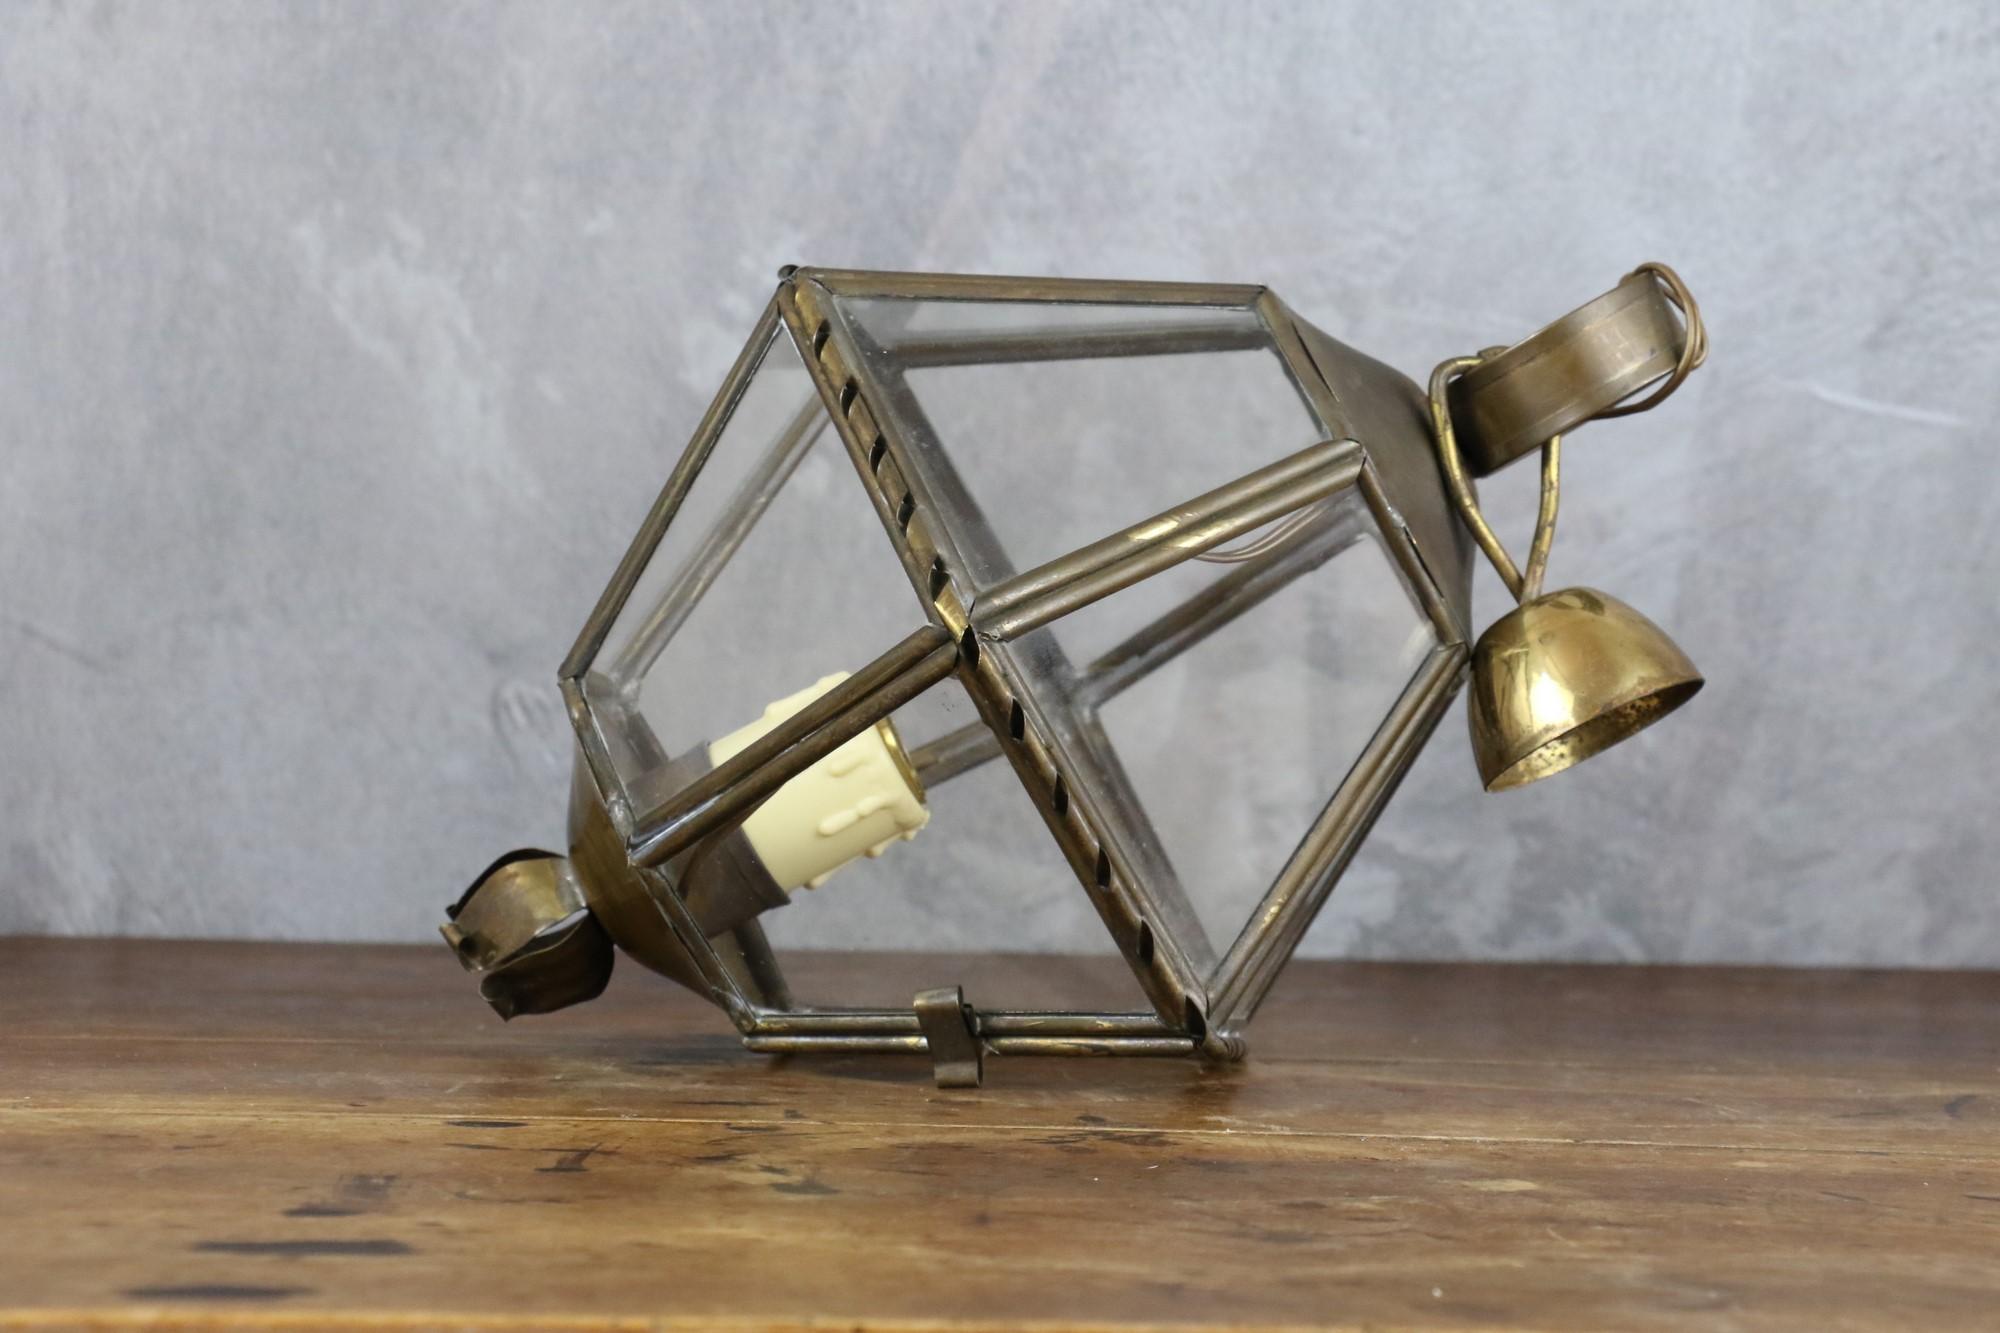 French vintage brass and cut clear glass hexagonal hanging lantern from circa the 1950s.
This adorable pendant lantern features a hexagonal brass and metal frame. Six faces and 12 clear glass panels on two levels.

Its height is 38cm (29cm without